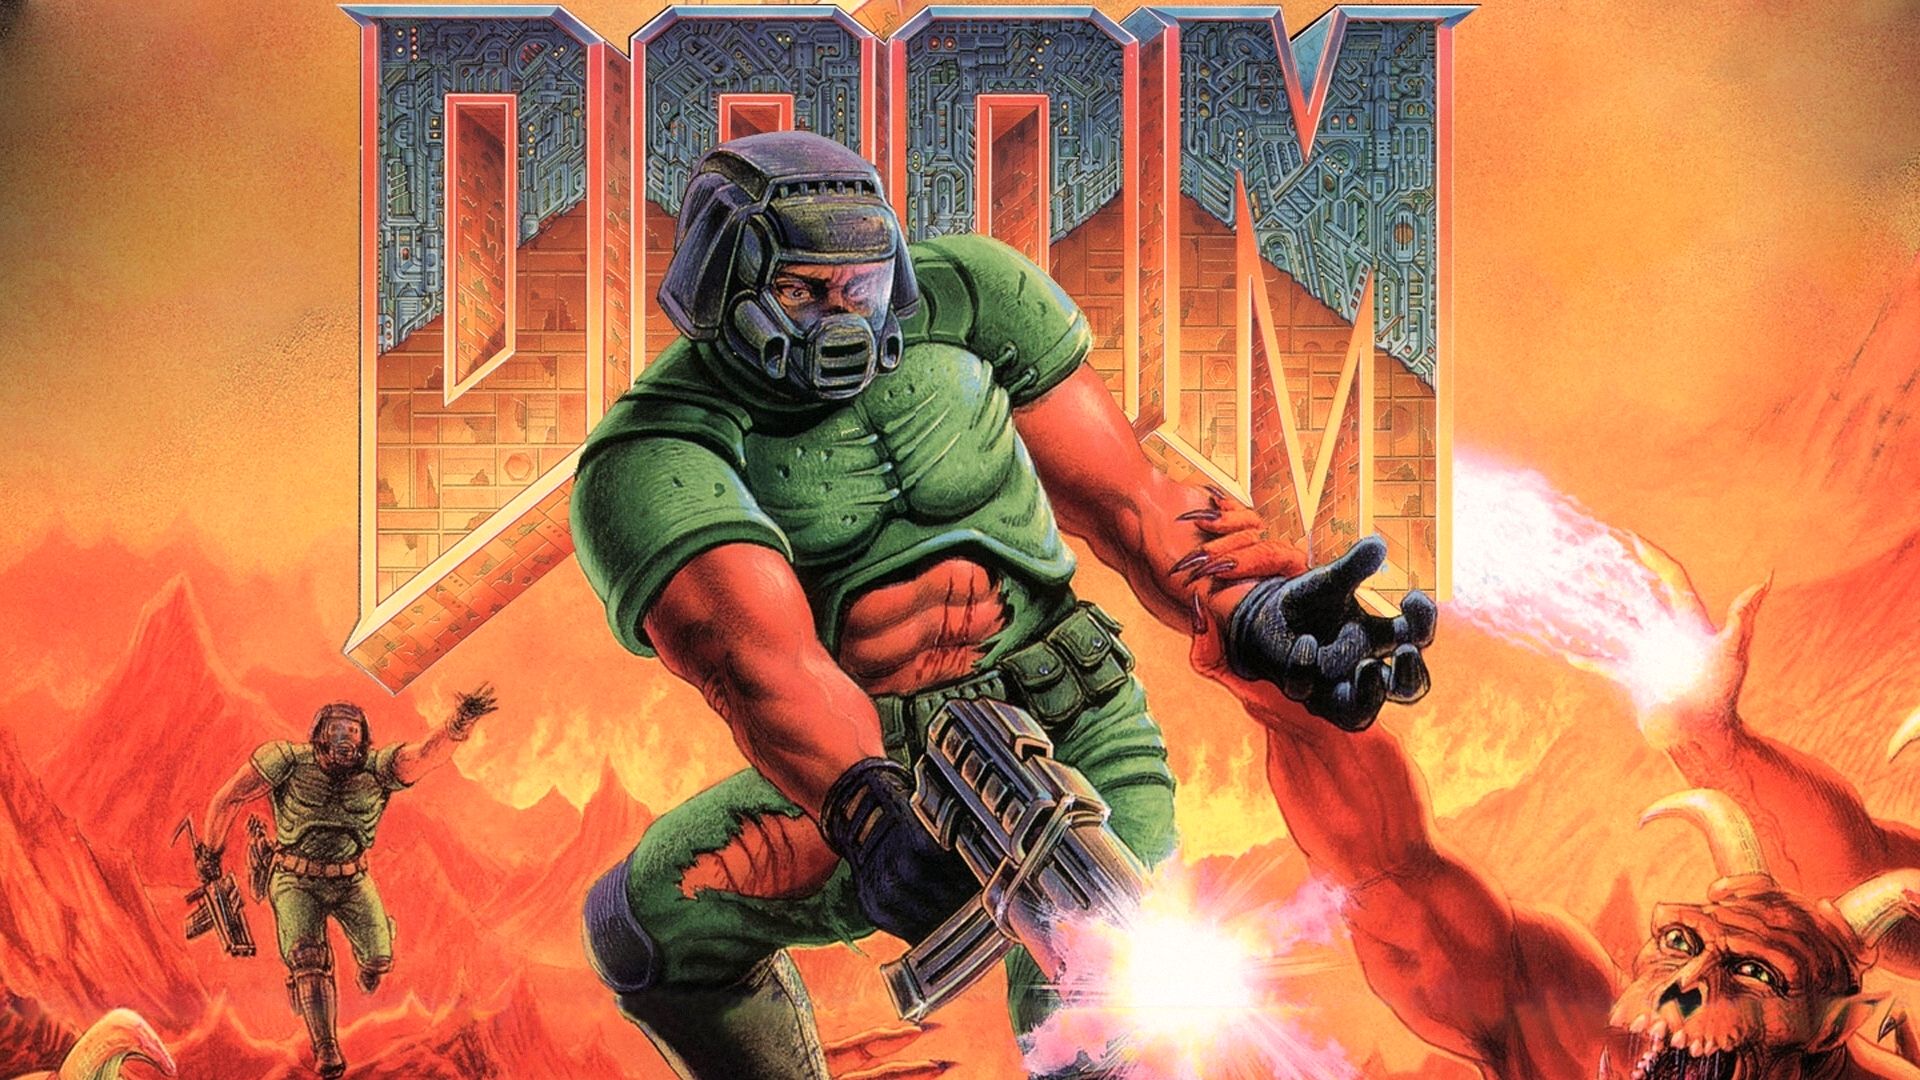 Wallpapers Doom Games Doom Games. Wallpapers Doom Games